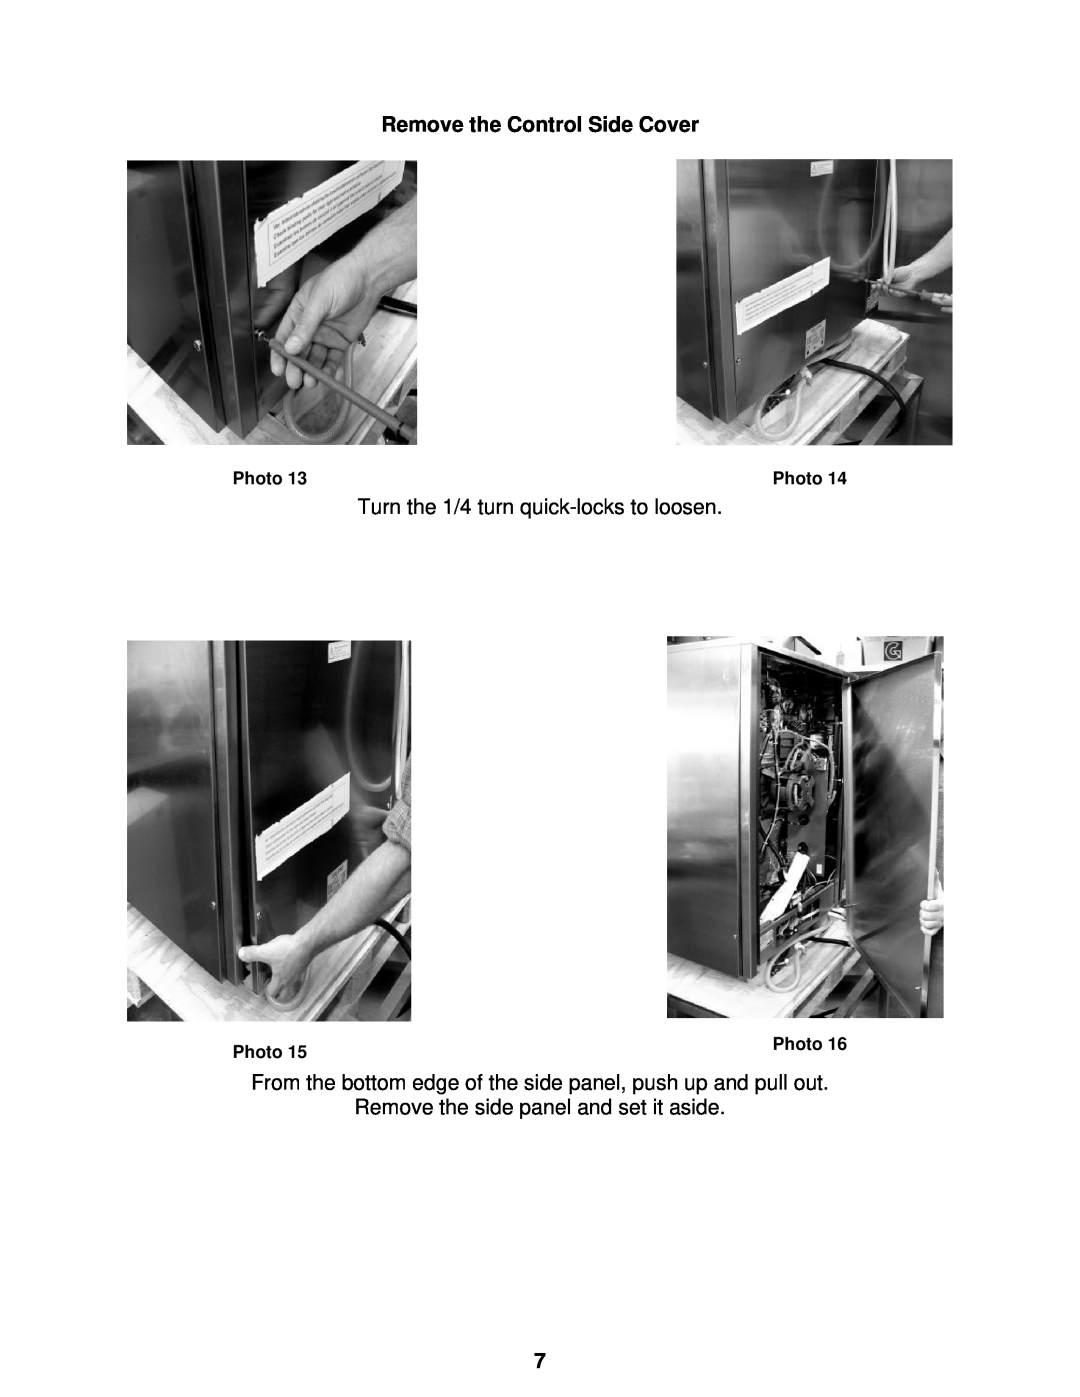 Cleveland Range Steam Oven Remove the Control Side Cover, Turn the 1/4 turn quick-locks to loosen, Photo 